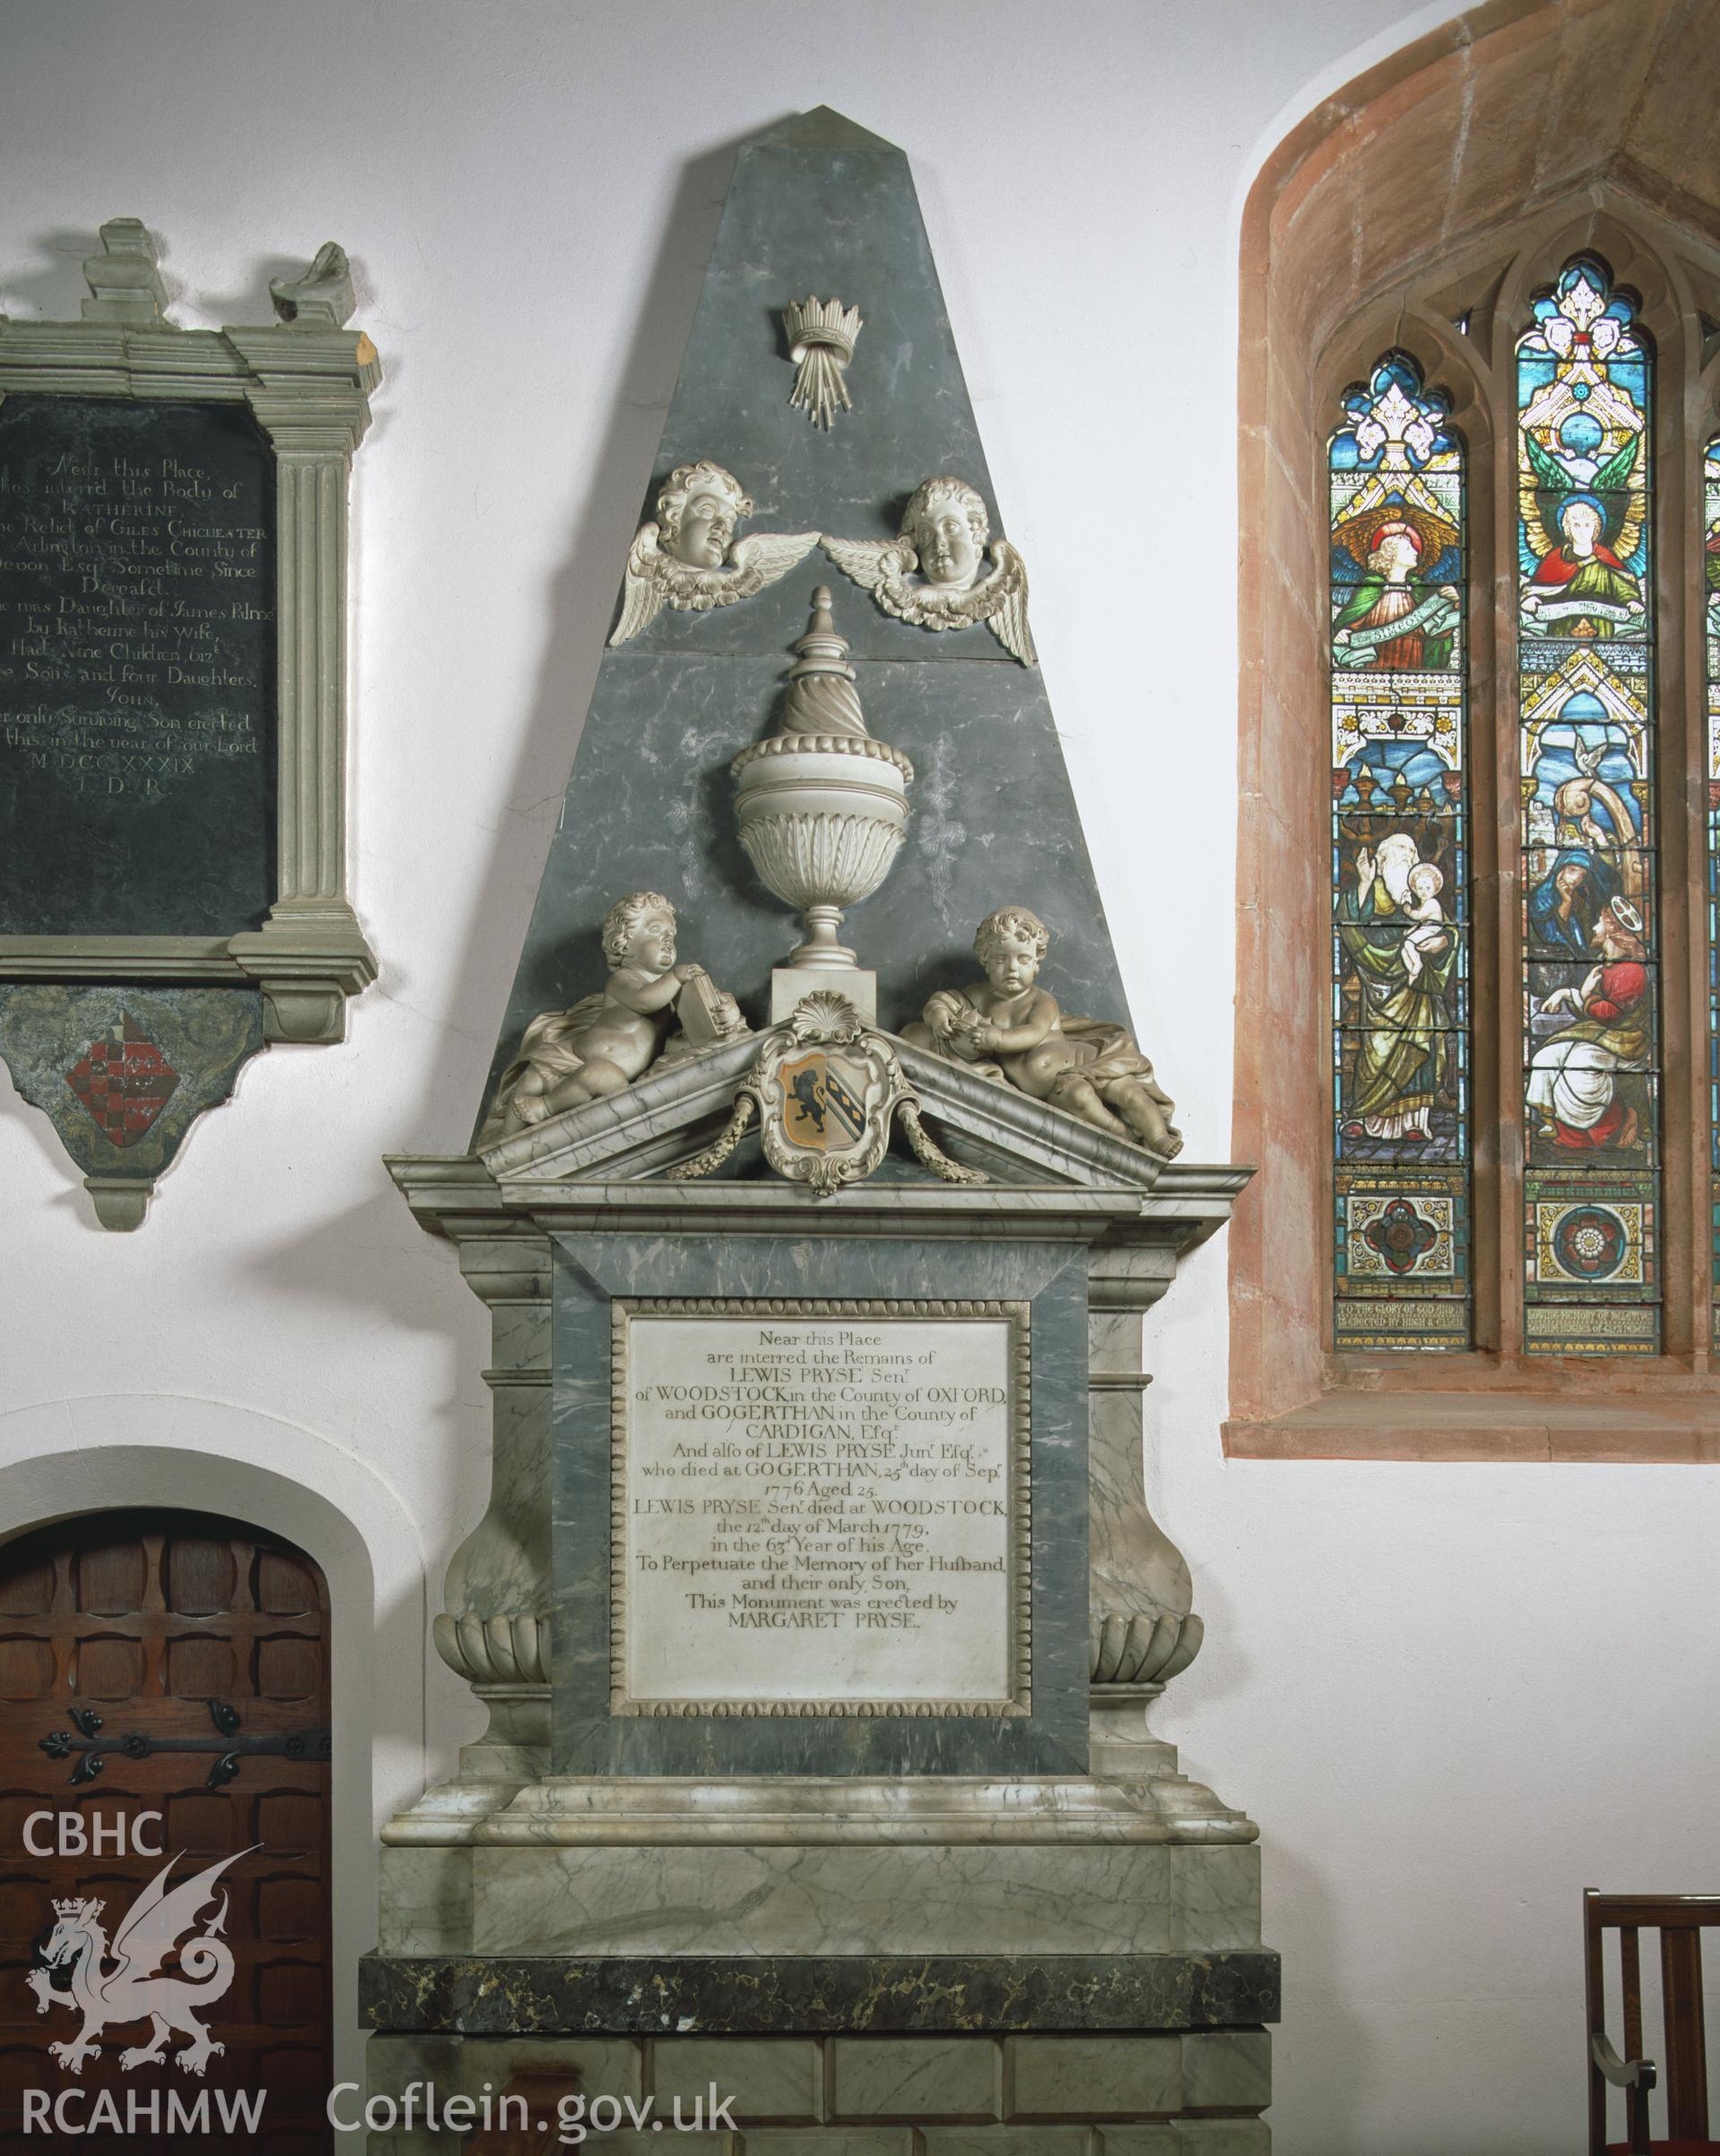 Colour transparency showing memorial to Lewis Pryse, situated in Llanbadarn Fawr Church, produced by Iain Wright, June 2004.